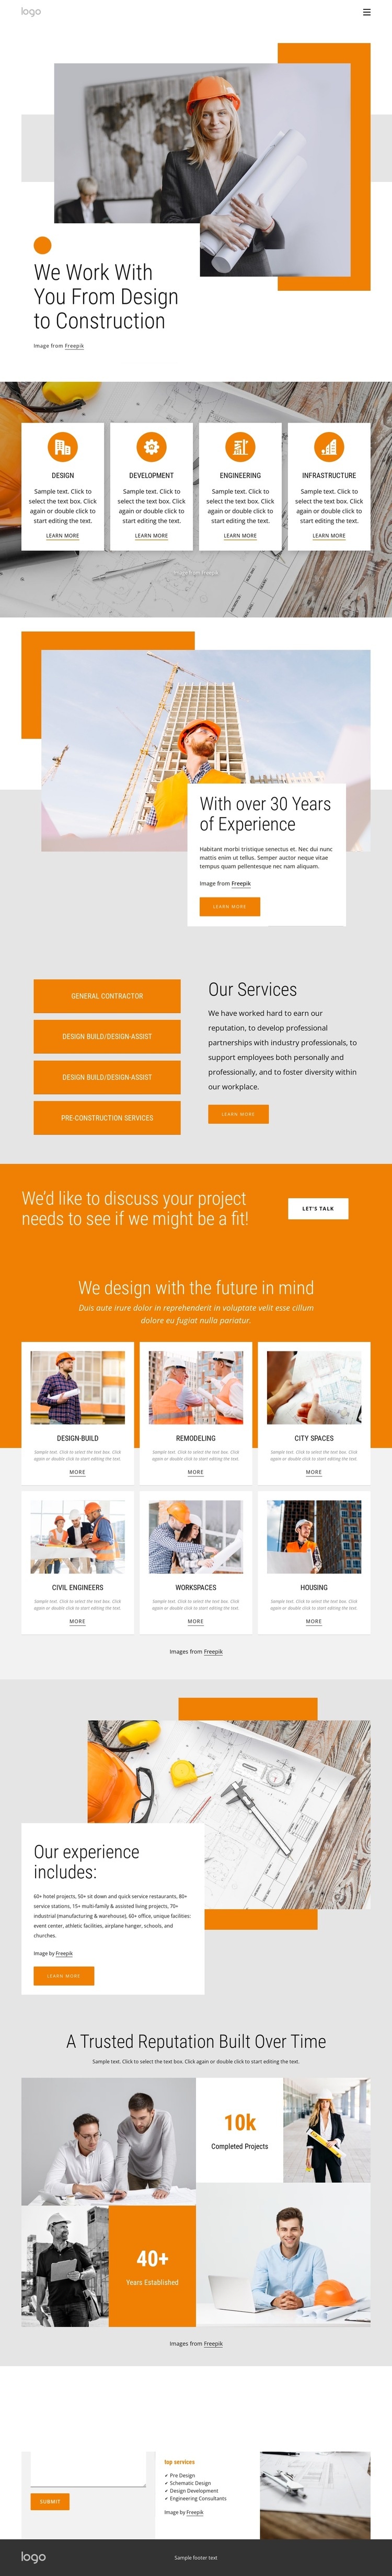 From design to construction Web Page Design